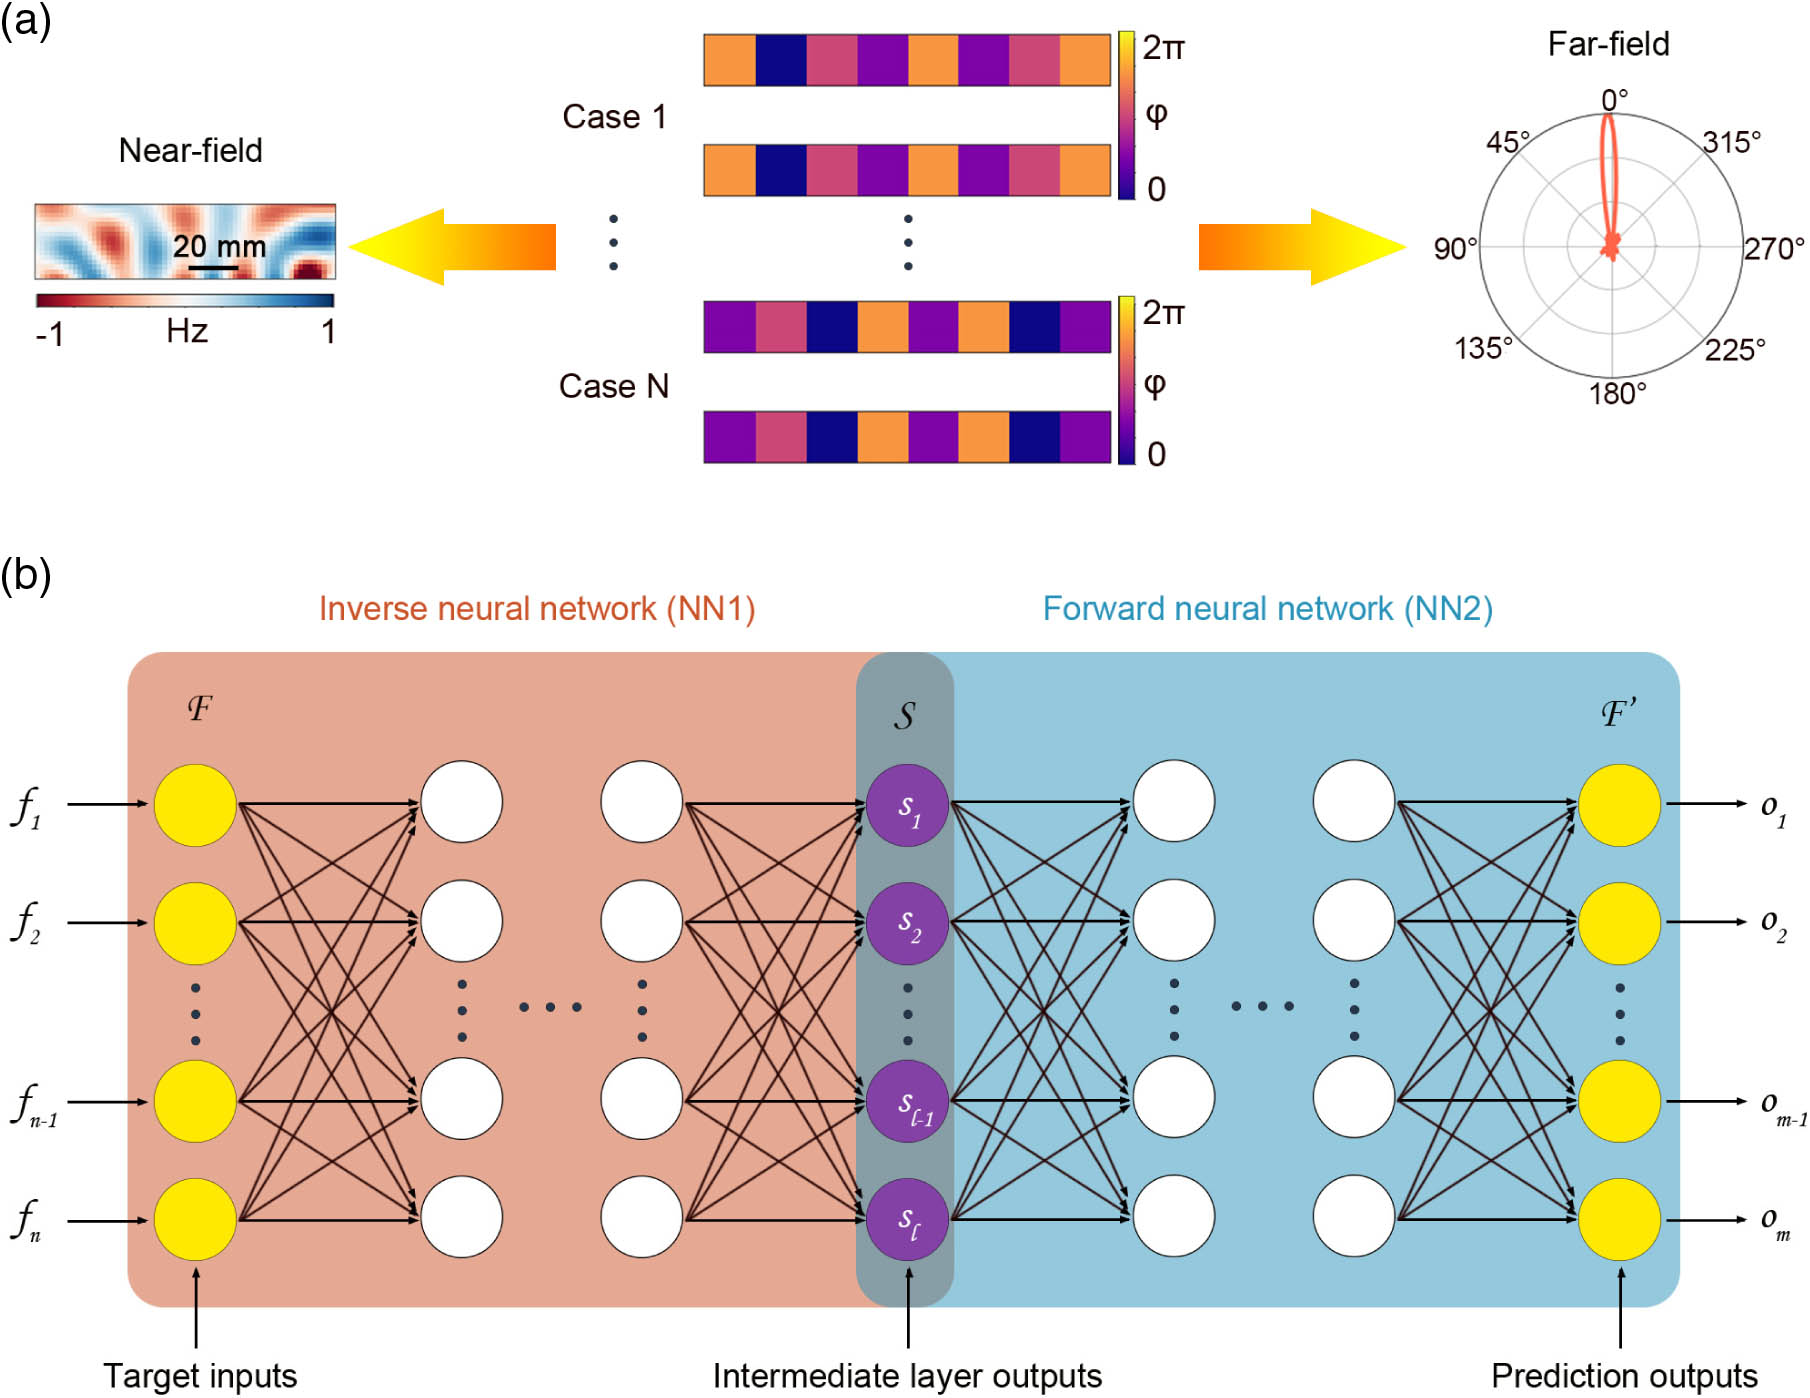 Nonuniqueness issue addressed by a T-NN in the inverse design. (a) Different metasurface arrangements induce exactly the same near field and far field, called the nonuniqueness issue. This nonuniqueness issue will make the deep neural network difficult to converge. (b) Schematic of a T-NN, consisting of an inverse deep neural network (NN1) and a forward deep neural network (NN2). The NN1 has the input of near-/far-field response and the output of metasurface arrangement (nonuniqueness). In contrast, the NN2 has the input of metasurface arrangement and the output of near-/far-field response (uniqueness). In the training procedure of the T-NN, the NN2 is pretrained and fixed, and only the NN1 is updated to reduce the loss function, that is, the difference between the target field response F and the output F′. Therefore, the metasurface arrangement S can be extracted from the intermediate layer.